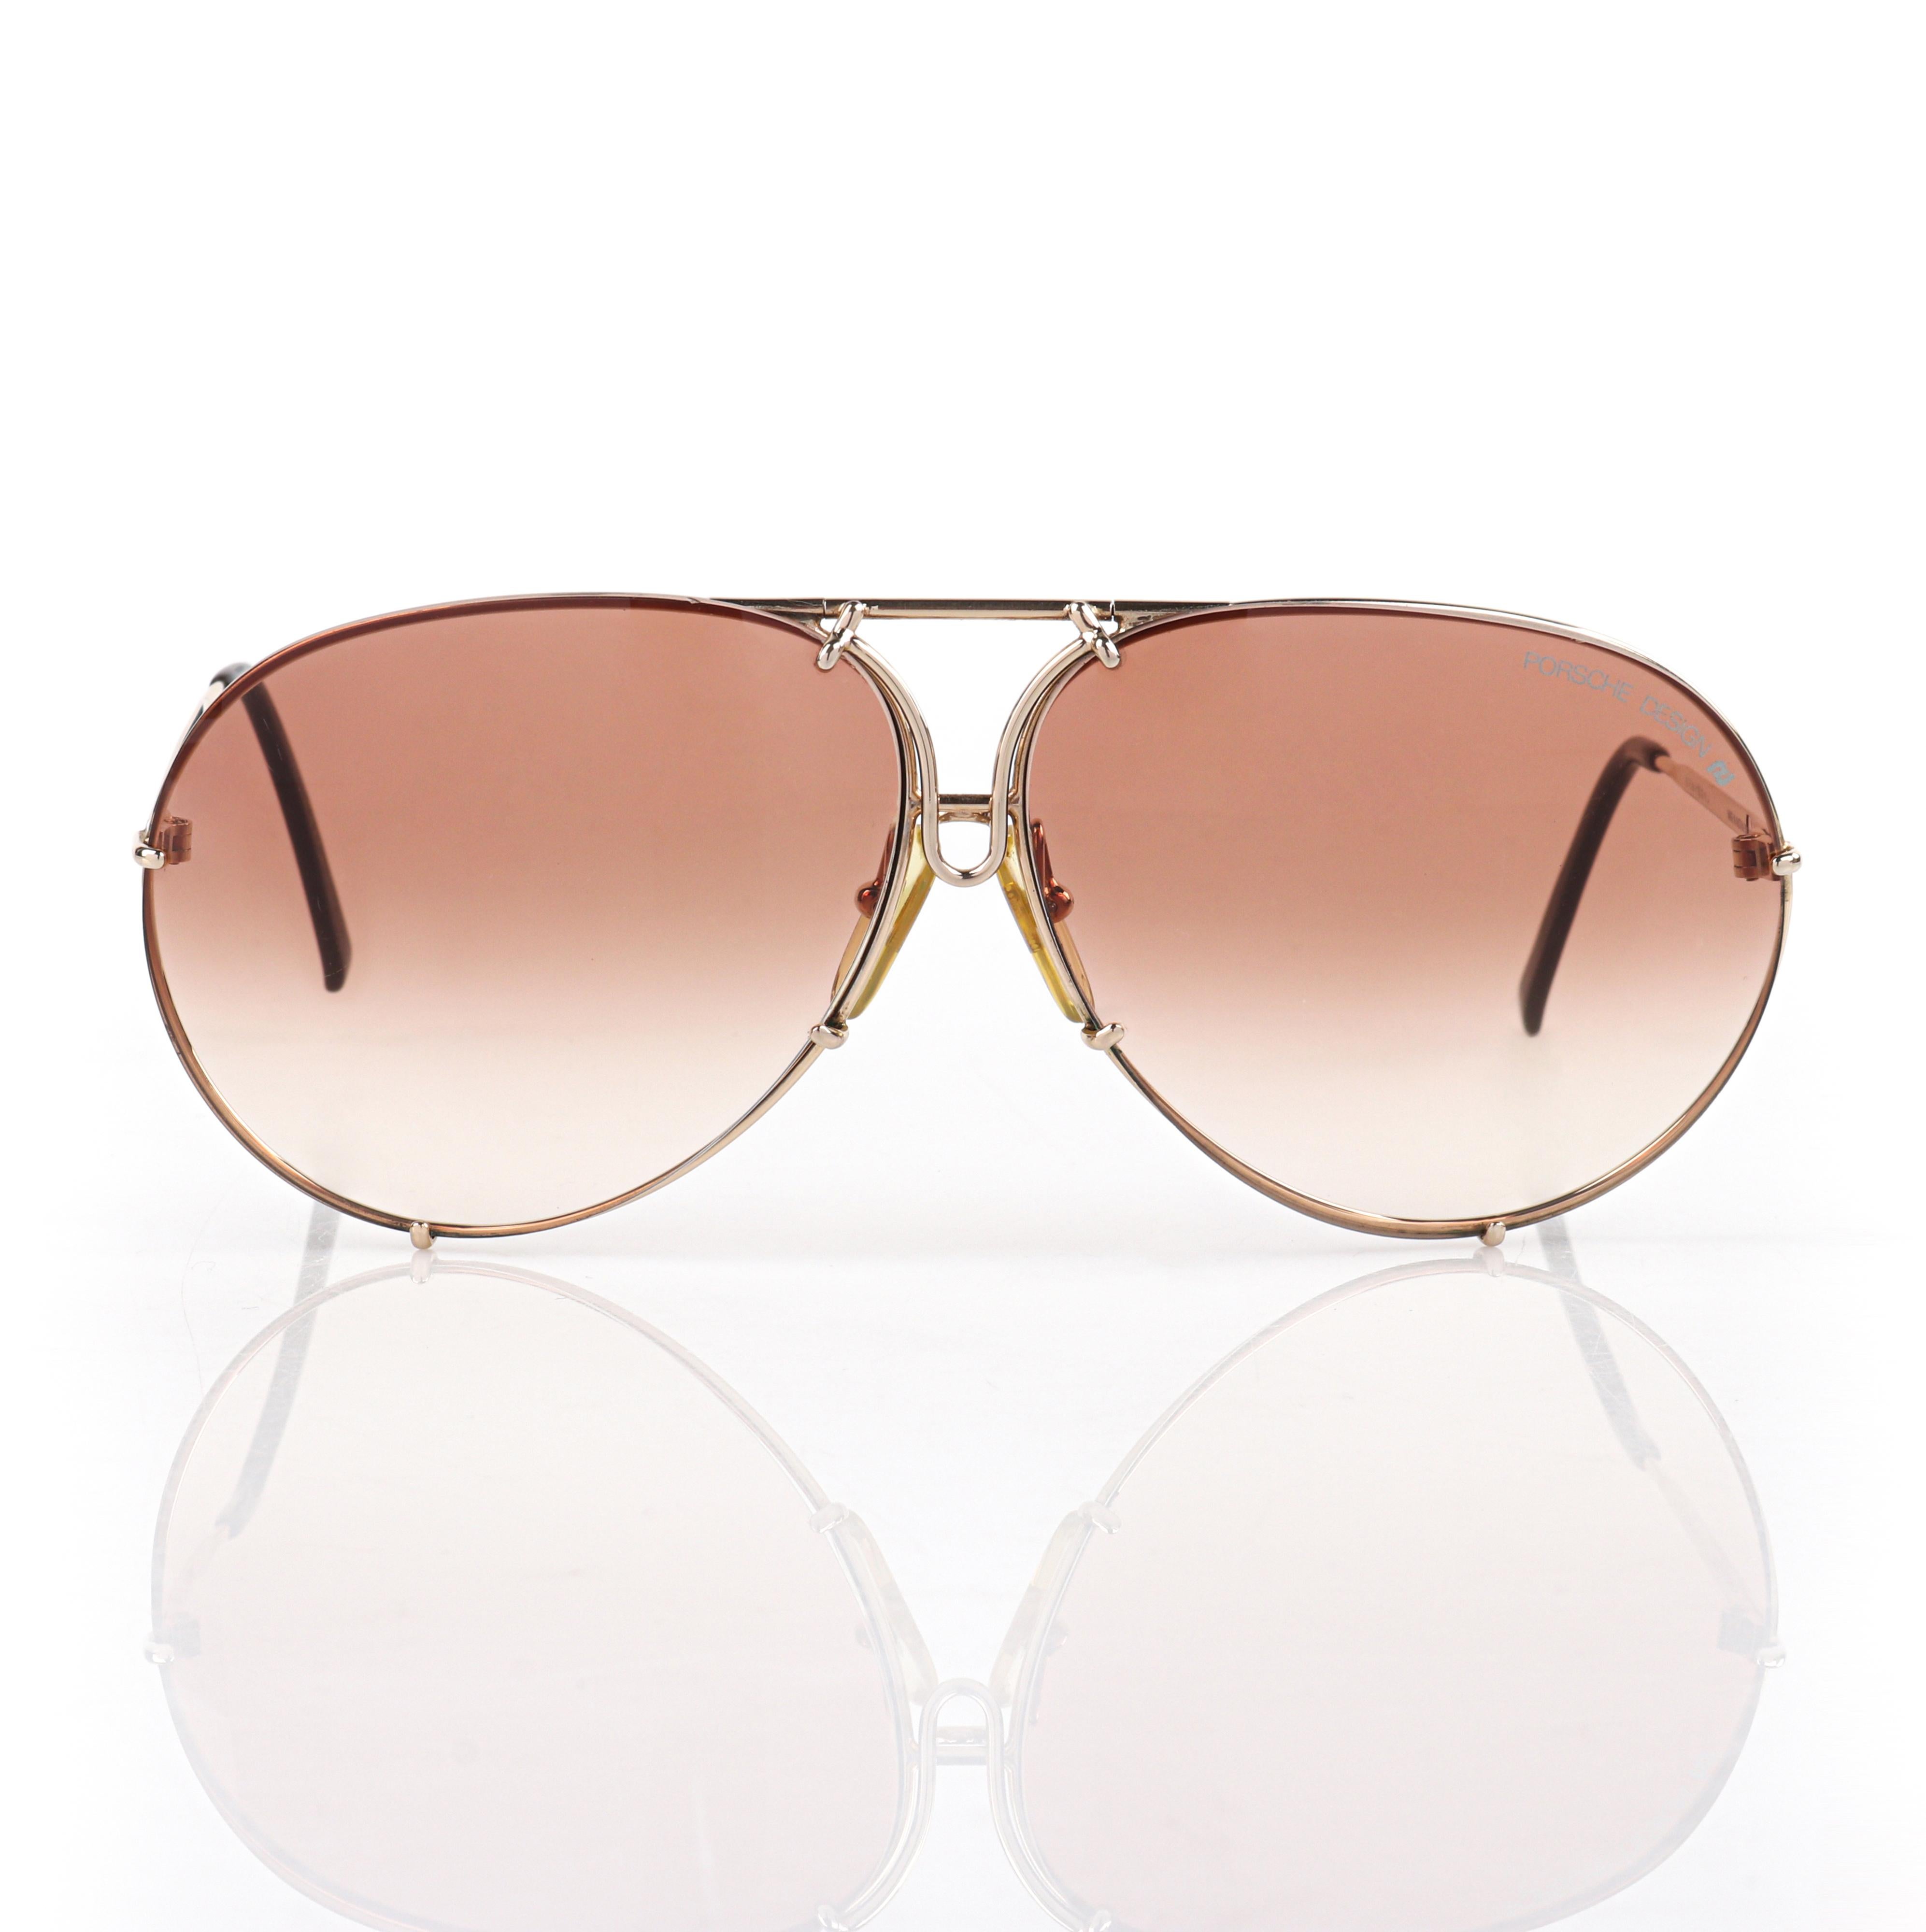 PORSCHE DESIGN BY CARRERA c.1987 Interchangeable Lens Aviator 5621 Sunglasses 
 
Brand / Manufacturer: Carrera Porsche
Circa: 1987
Manufacturer Style Name: 5621
Style: Aviator Sunglasses
Color(s): Shades of gold and brown
Lined: No
Unmarked Fabric